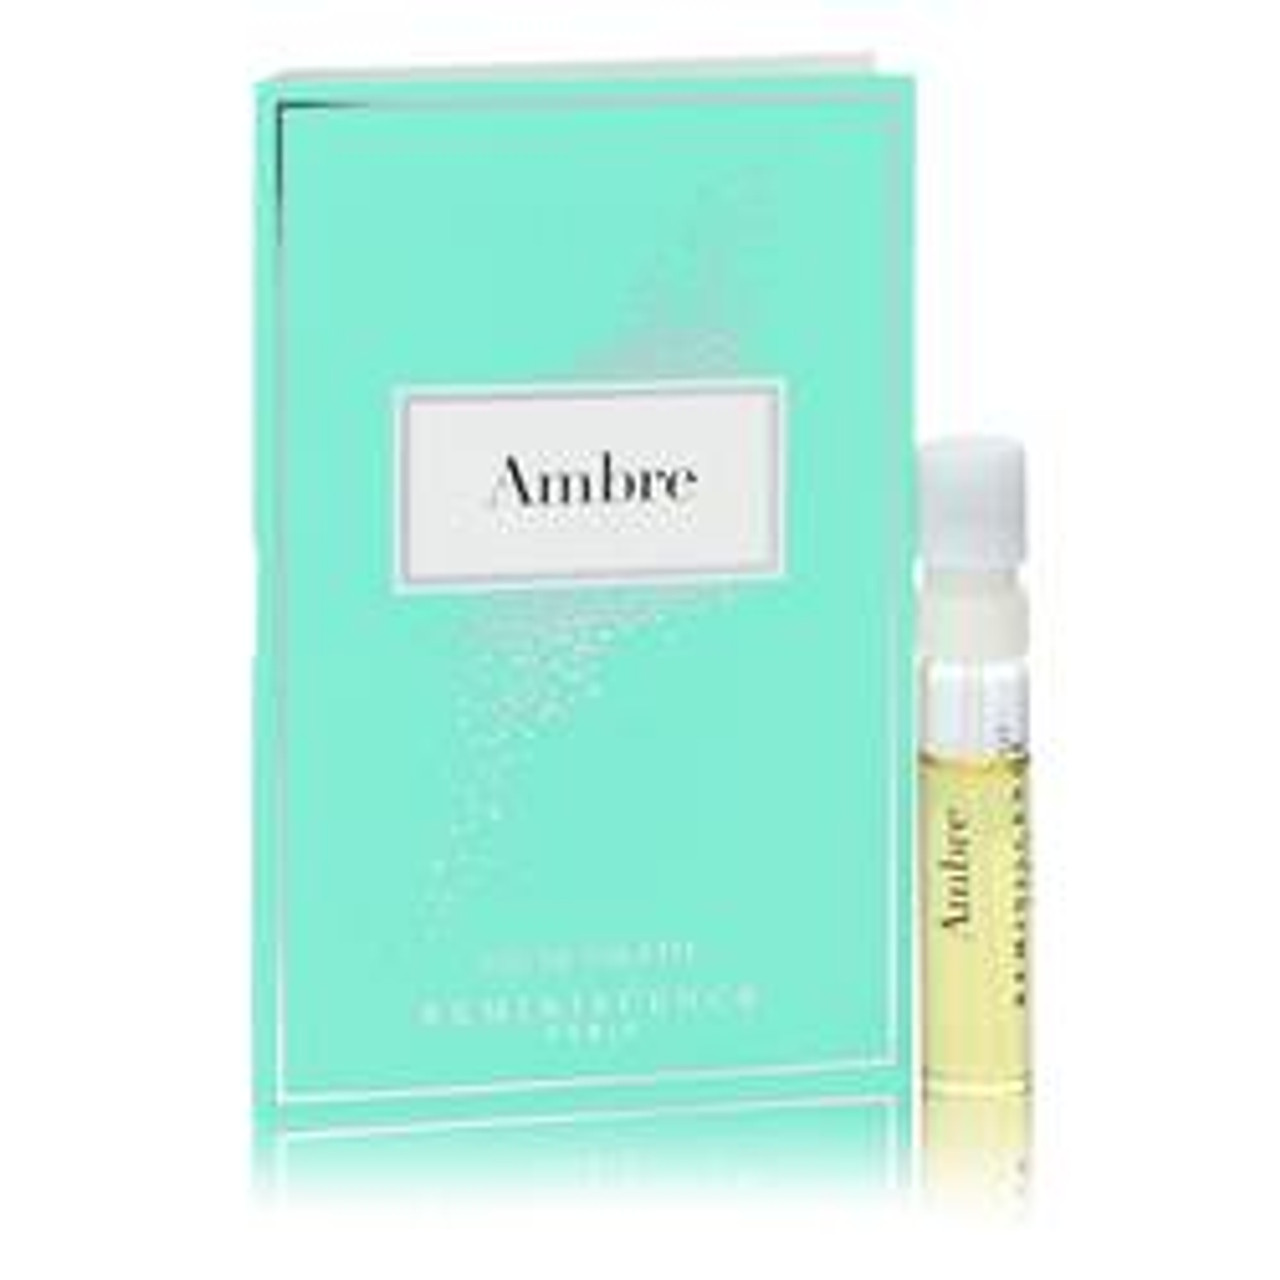 Reminiscence Ambre Perfume By Reminiscence Vial (sample) 0.06 oz for Women - [From 11.00 - Choose pk Qty ] - *Ships from Miami